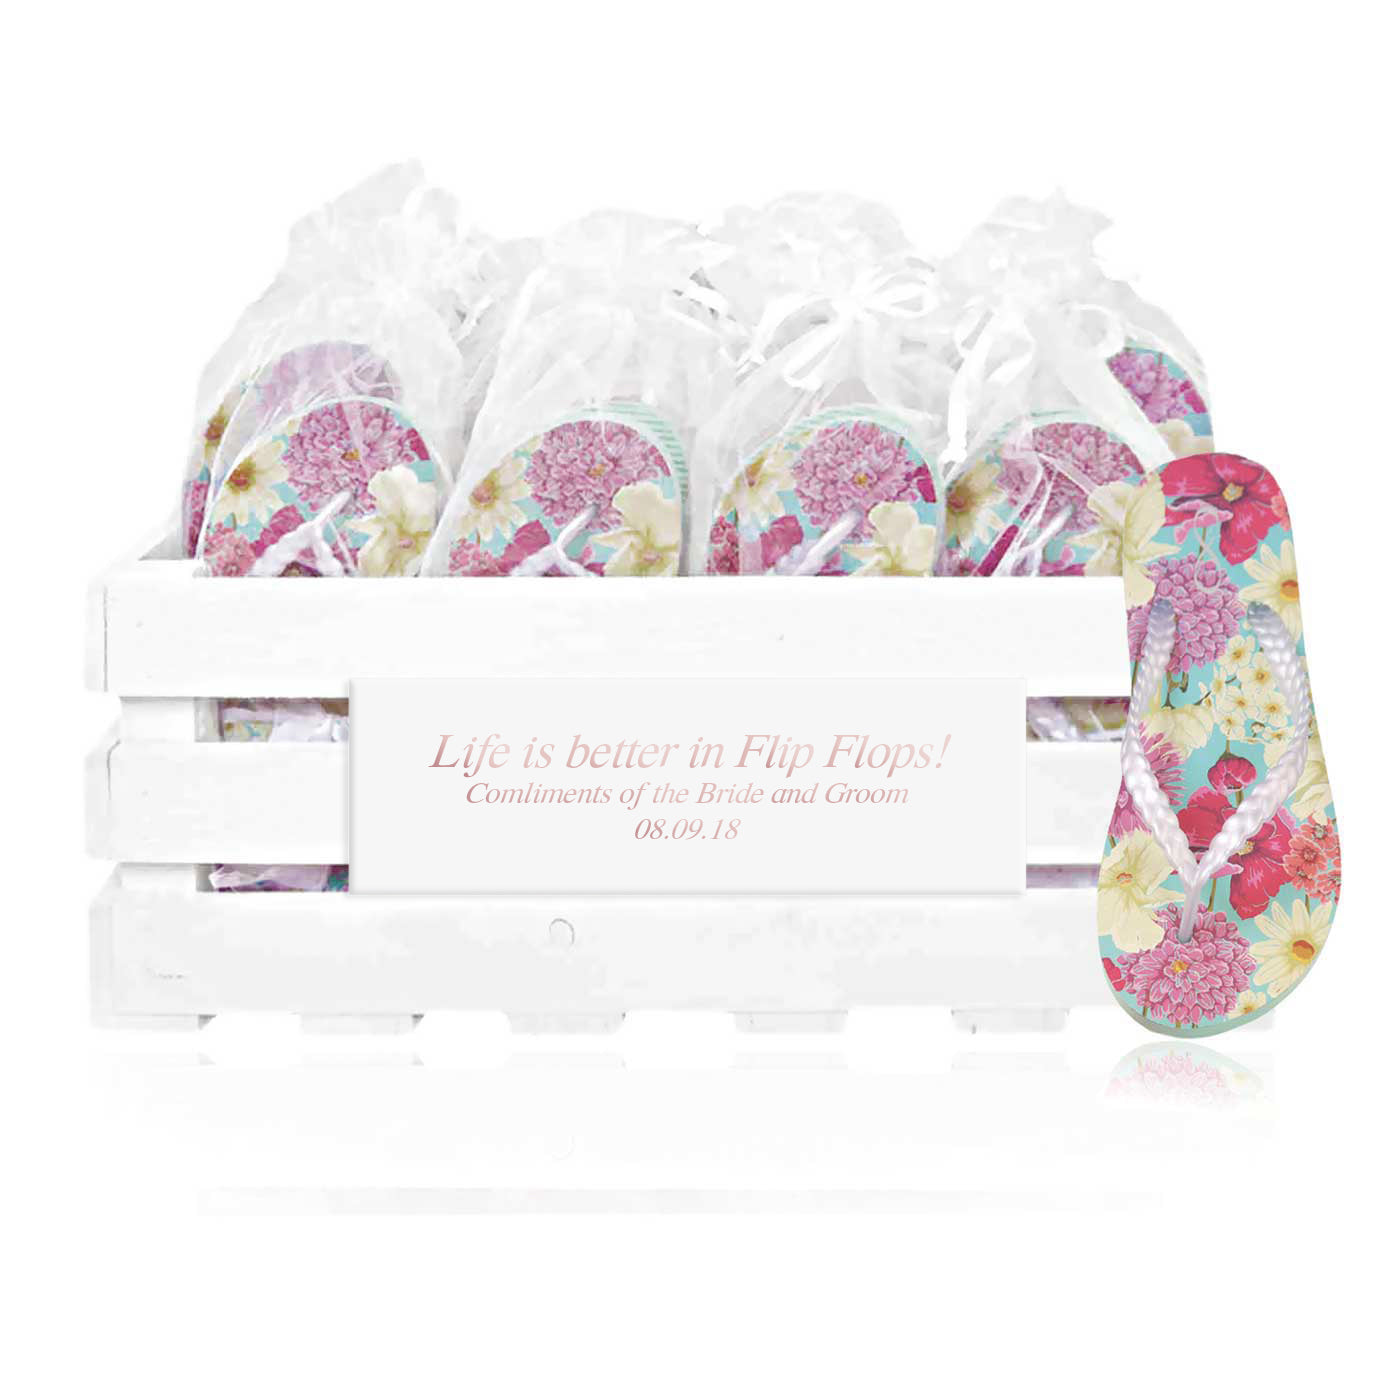 20 pairs of pastel flower flip flops in a personalized crate